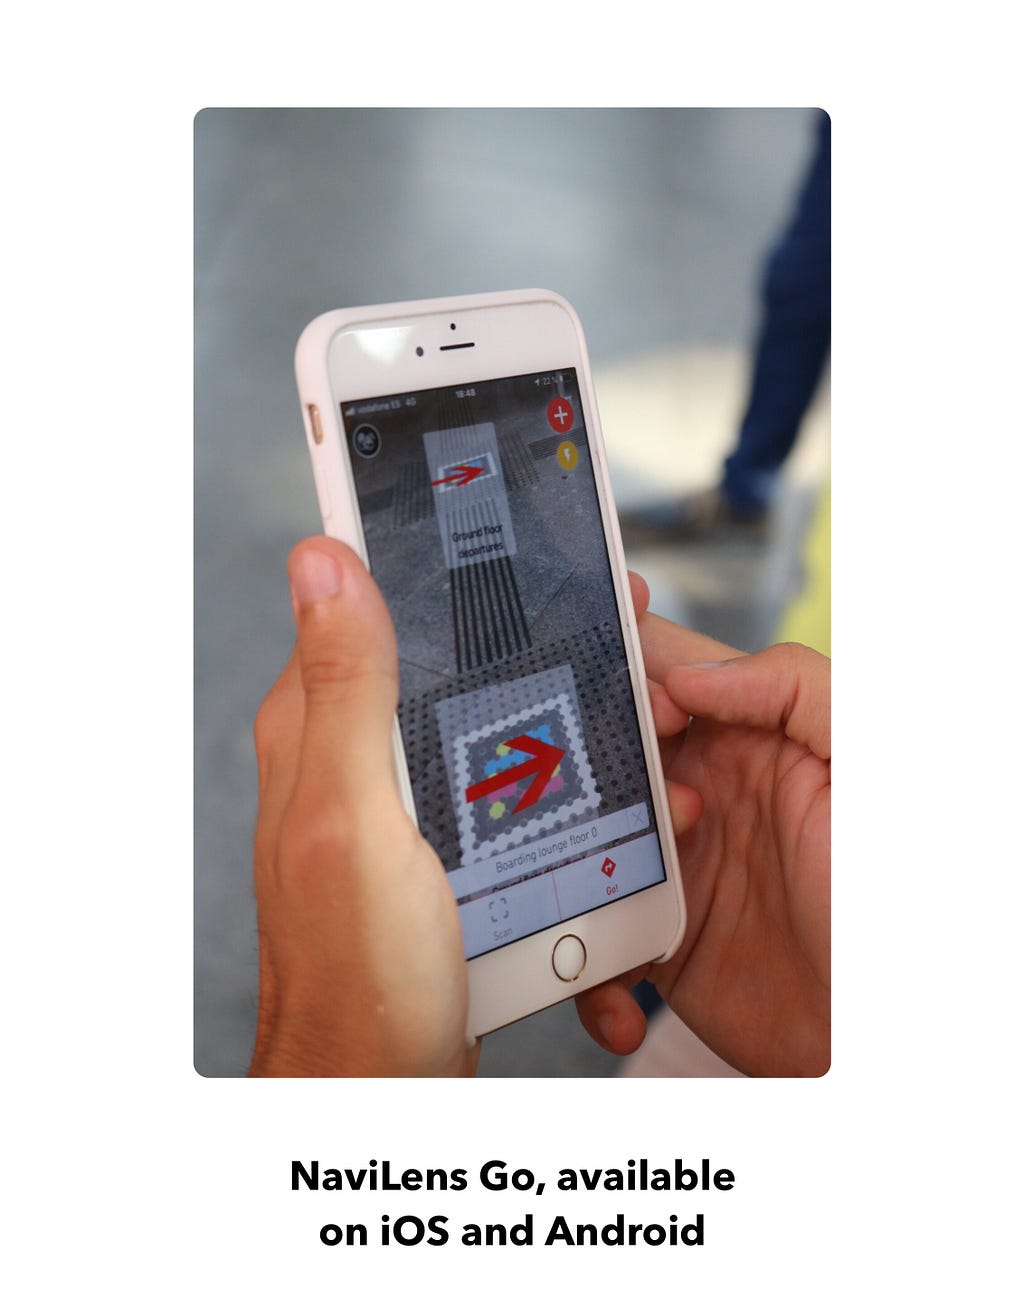 NaviLens GO, an app for sighted users available on iOS and Android.